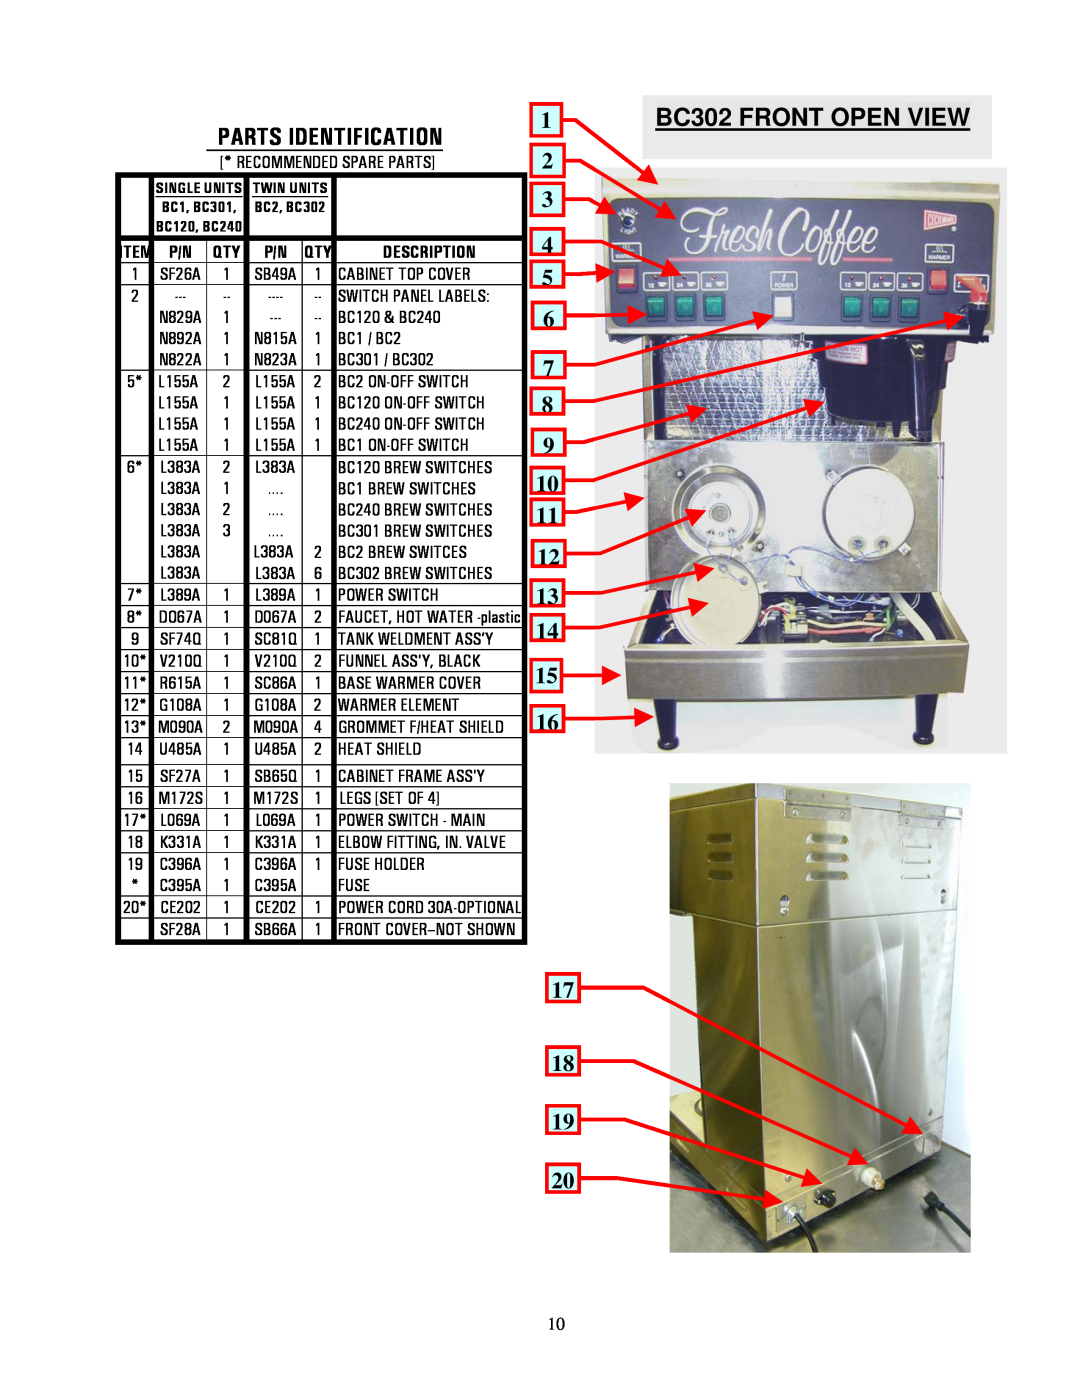 Cecilware BC120, BC301, BC240 specifications BC302 FRONT OPEN, Parts Identification, View, Description 